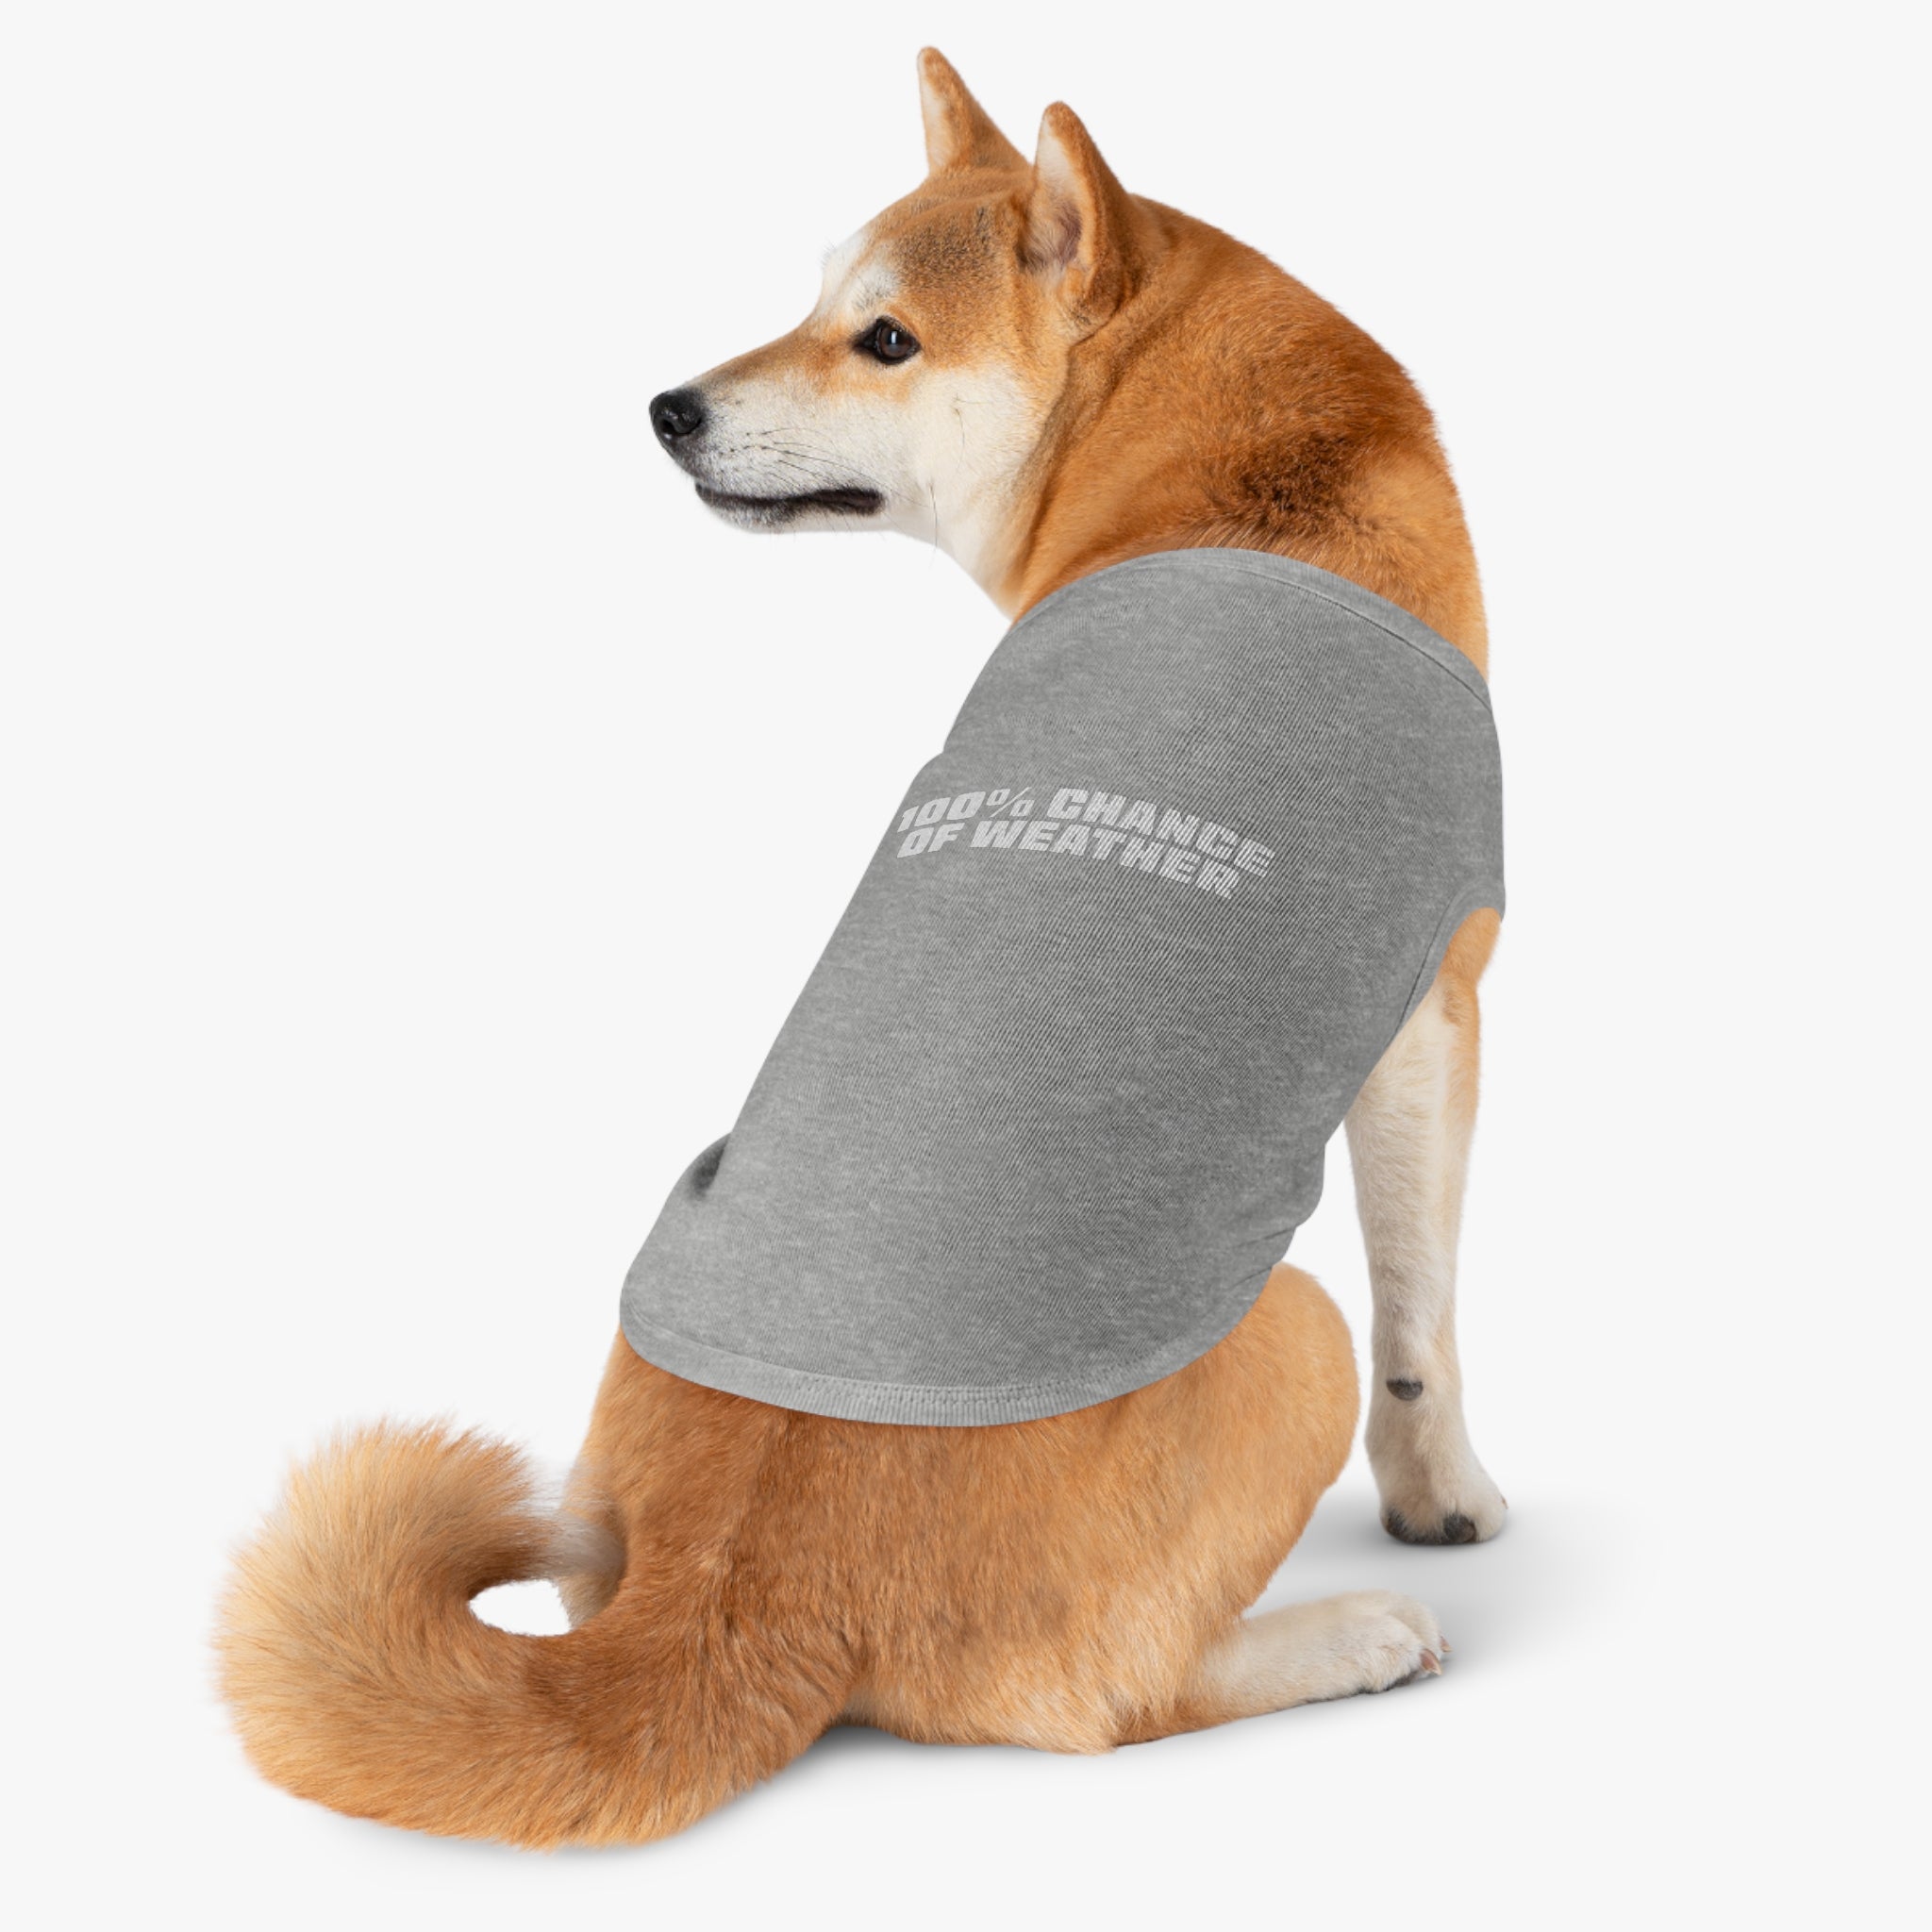 100% Chance of Weather Pet Shirt 